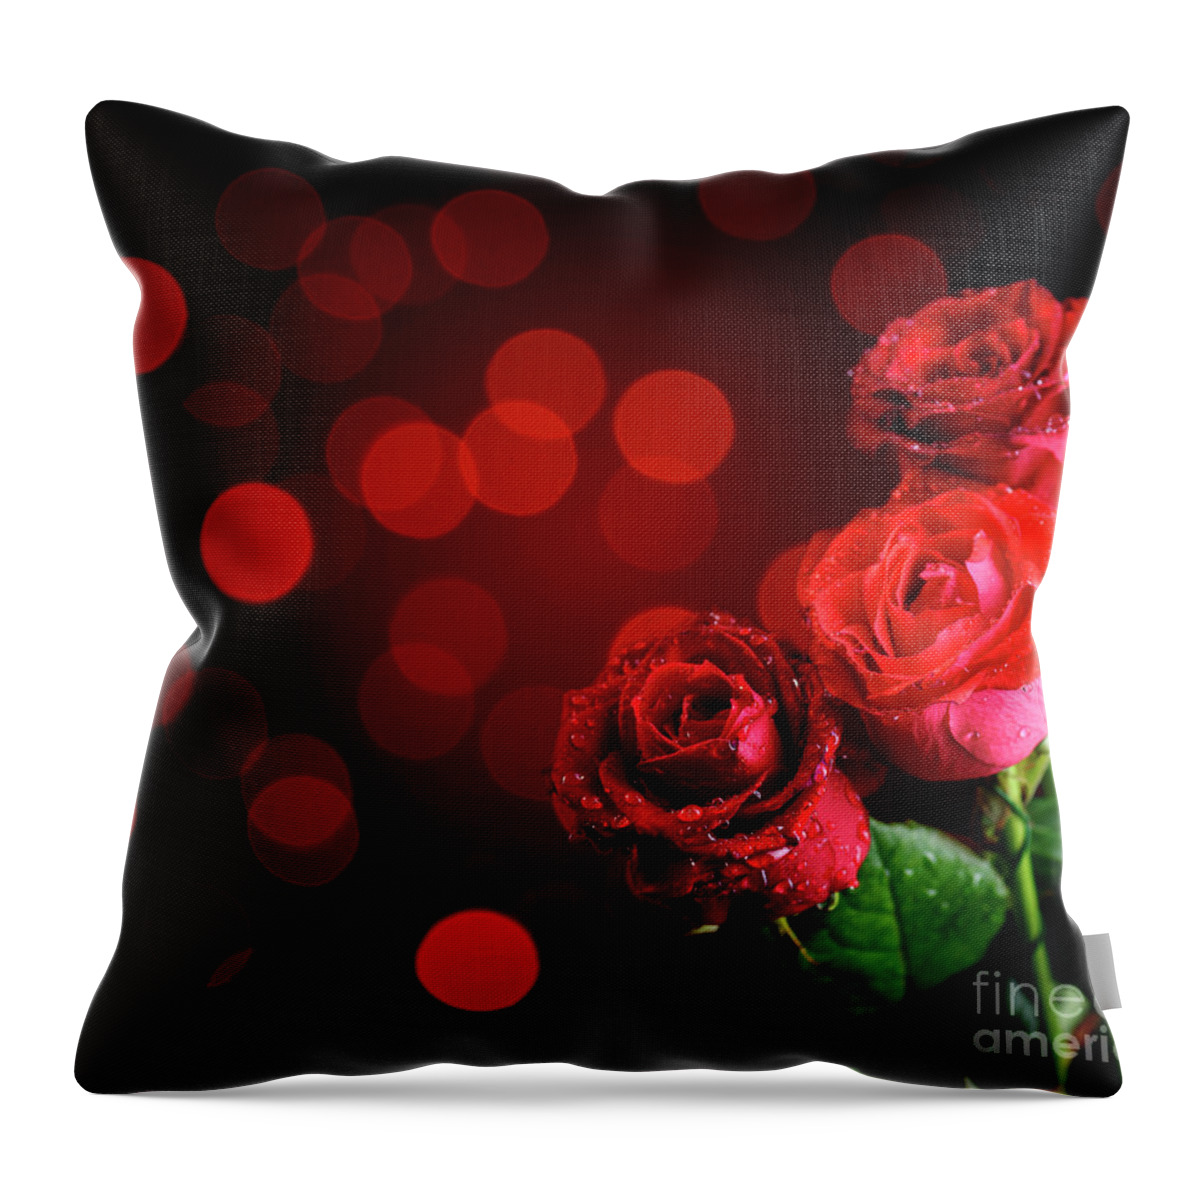 Roses Throw Pillow featuring the photograph Valentine Roses by Jelena Jovanovic